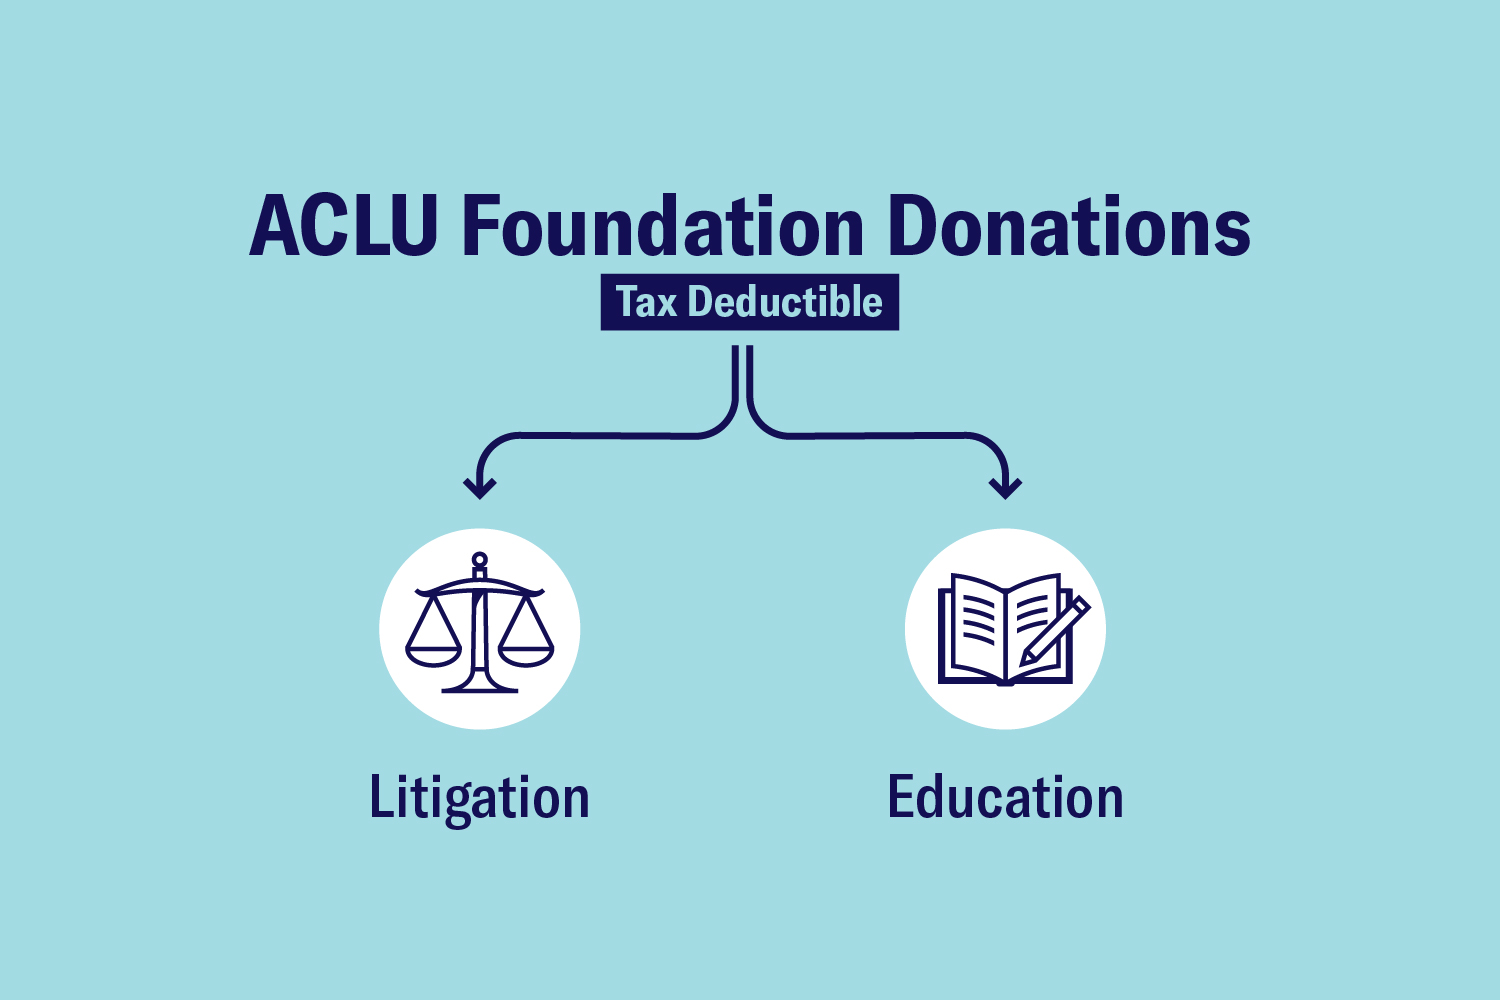 Donations to ACLU foundation fund litigation and advocacy